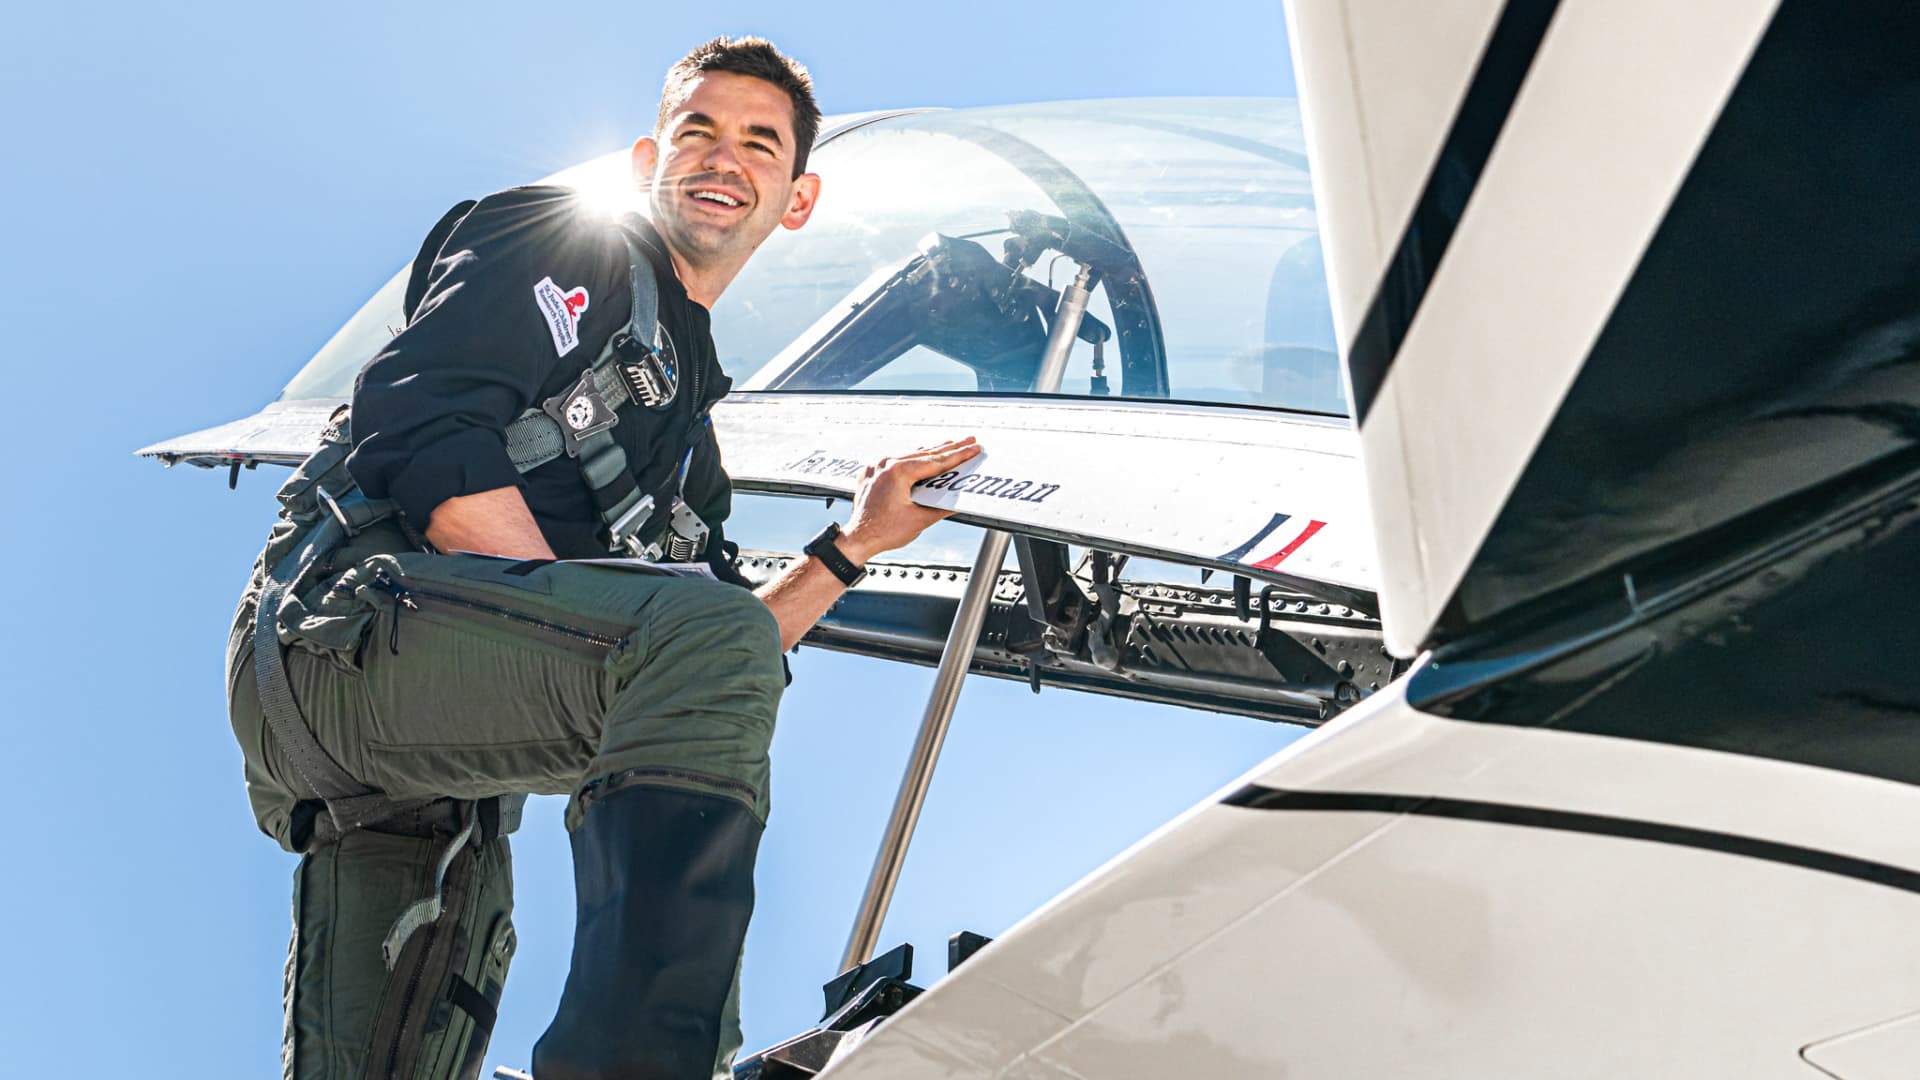 Jared Isaacman boards a U.S. Air Force Thunderbirds fighter jet during a flight on April 9, 2021.